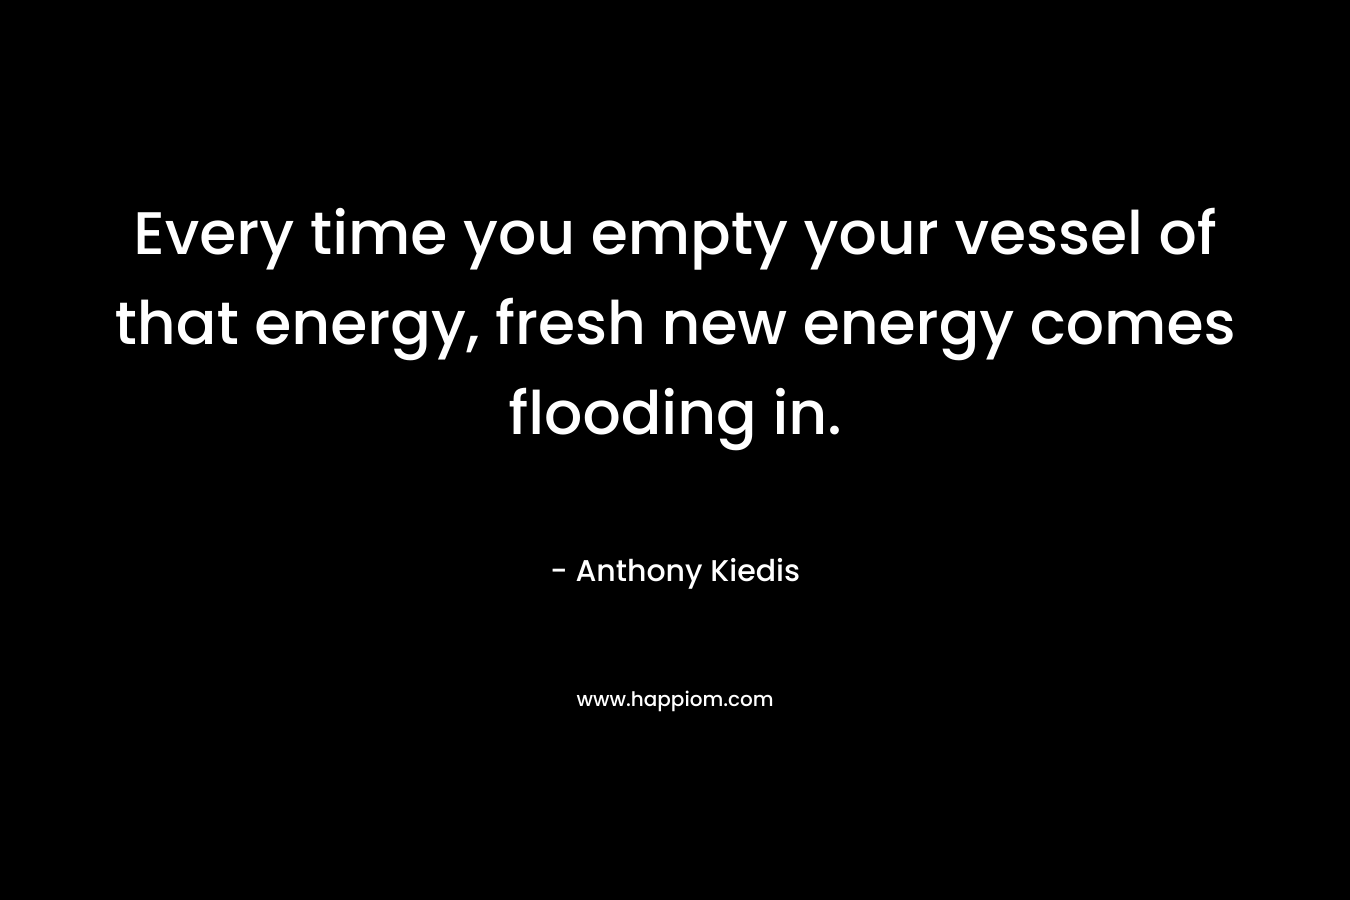 Every time you empty your vessel of that energy, fresh new energy comes flooding in. – Anthony Kiedis